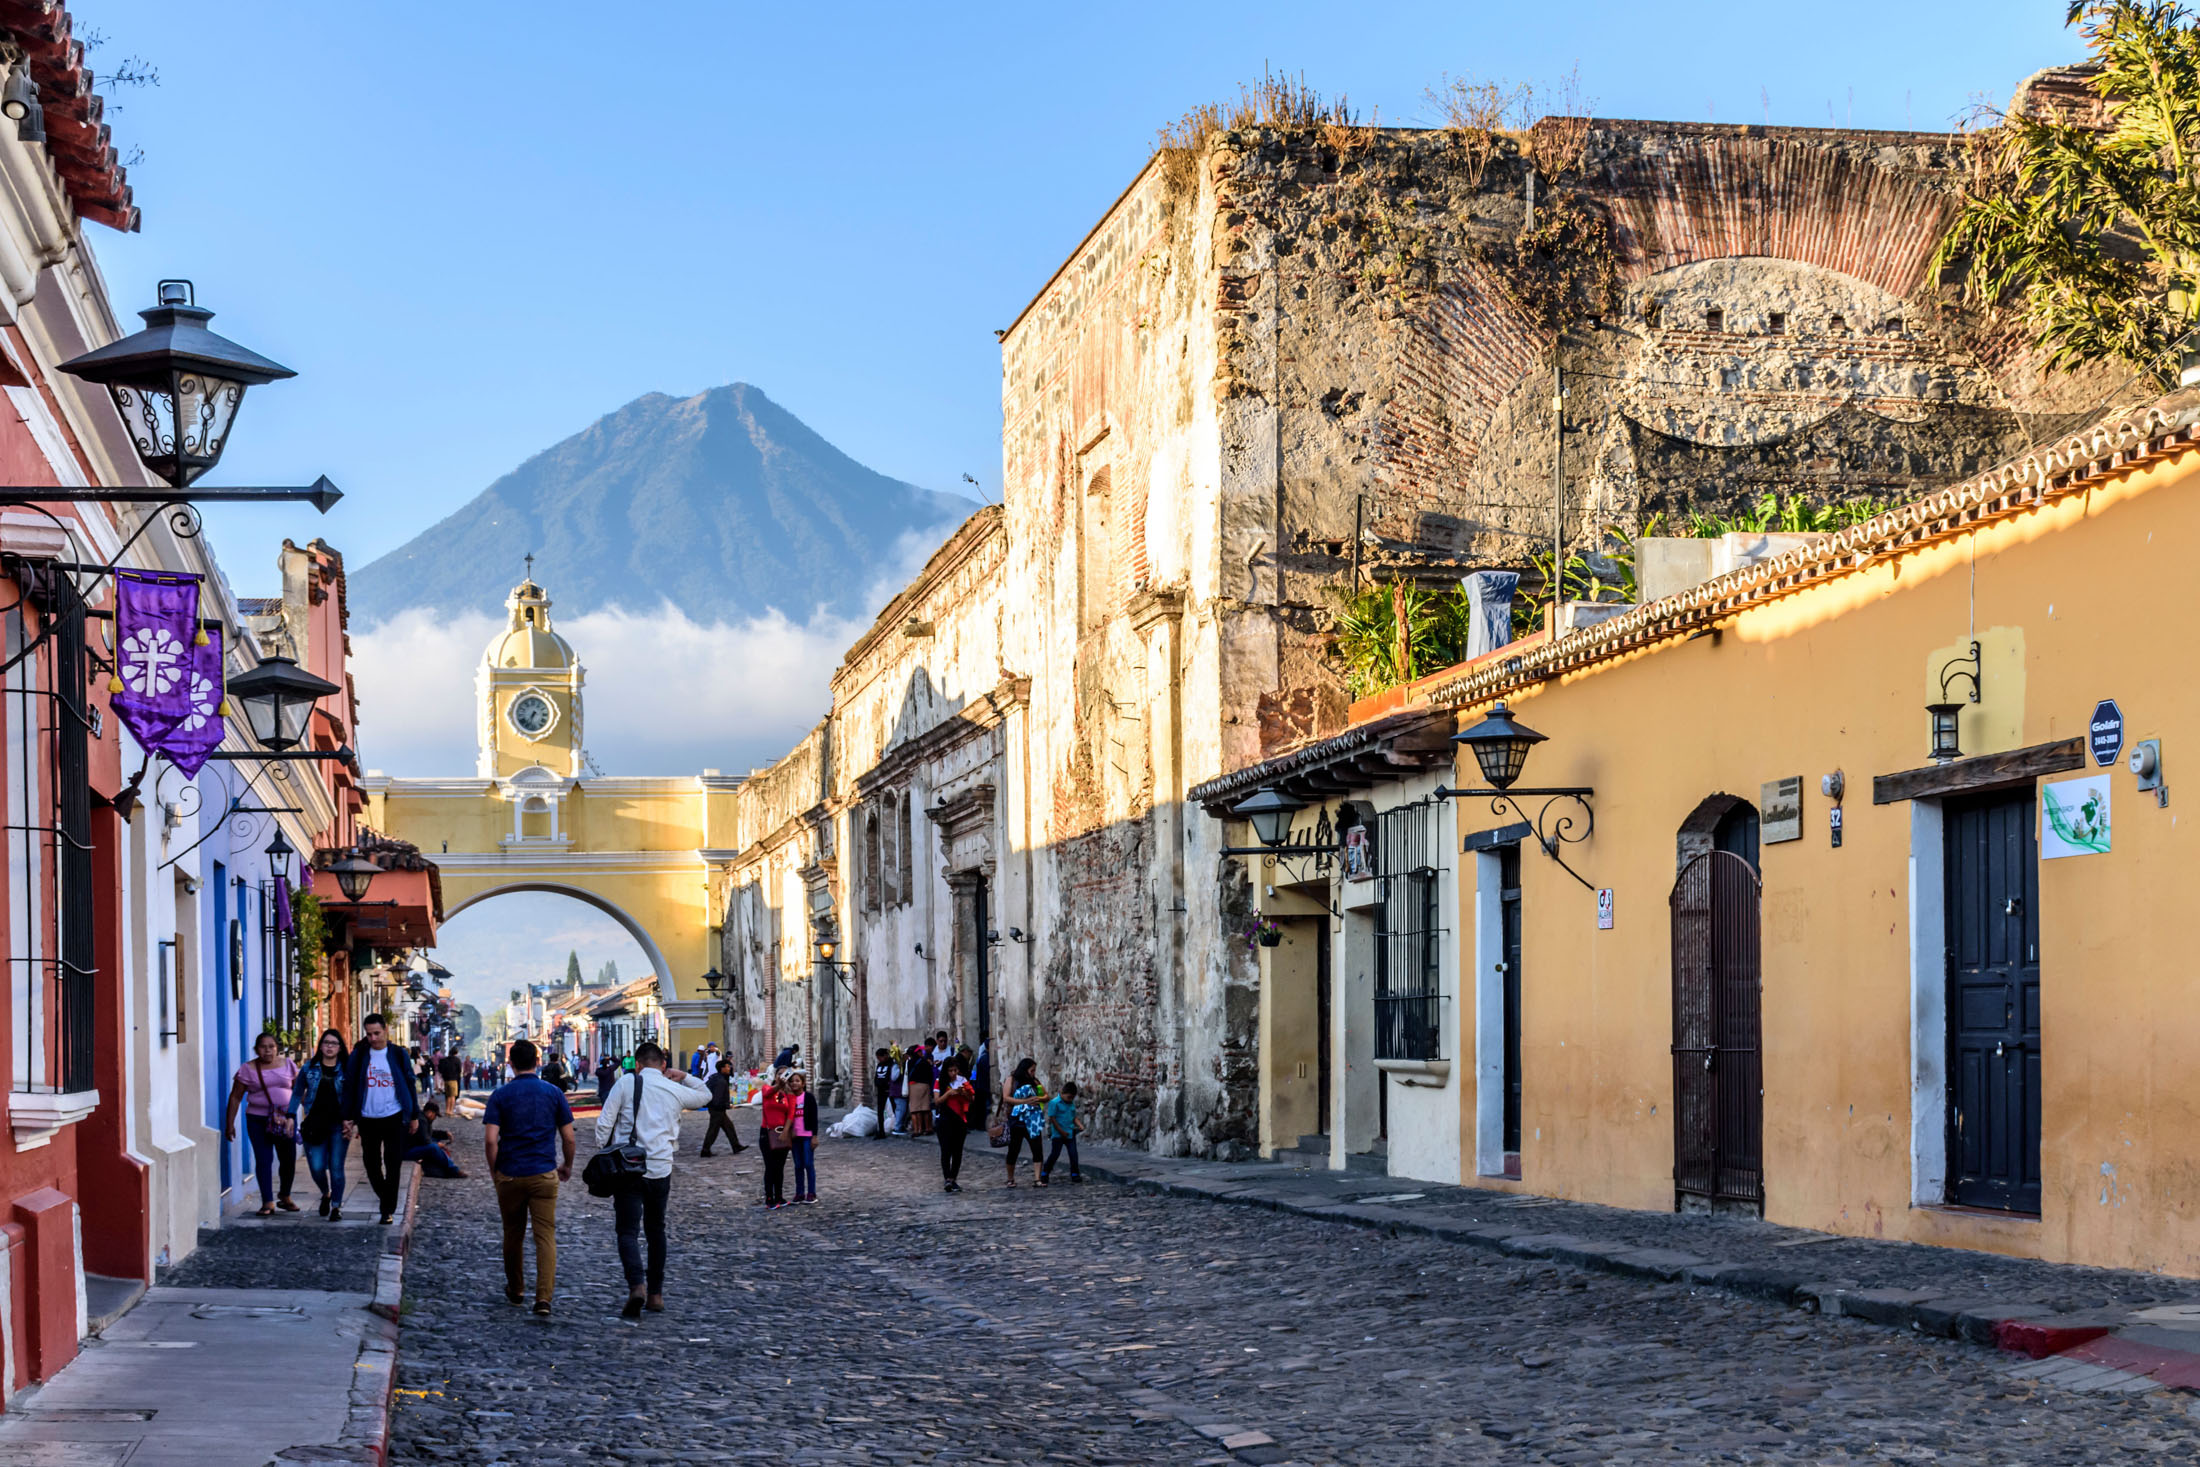 The colorful streets of Antigua offer grand volcano views